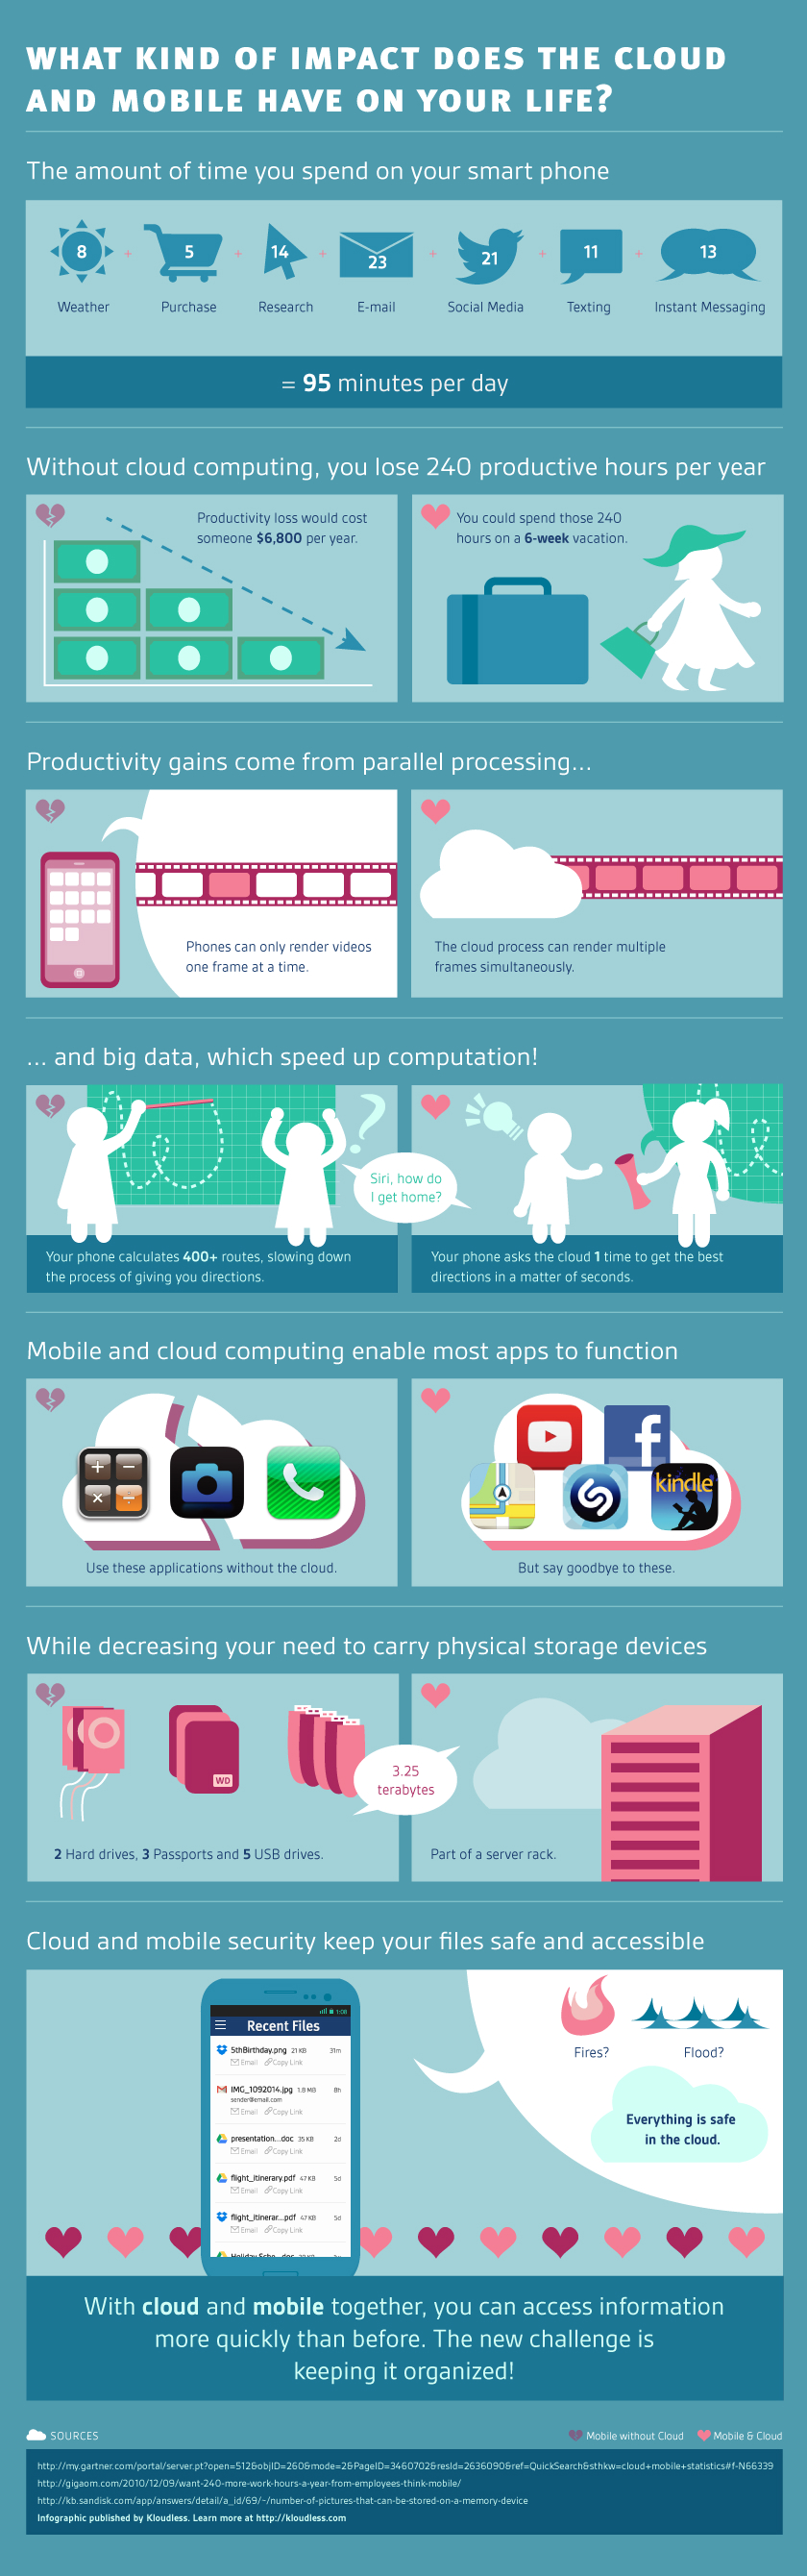 kloudless-smartphone-cloud-infographic-full